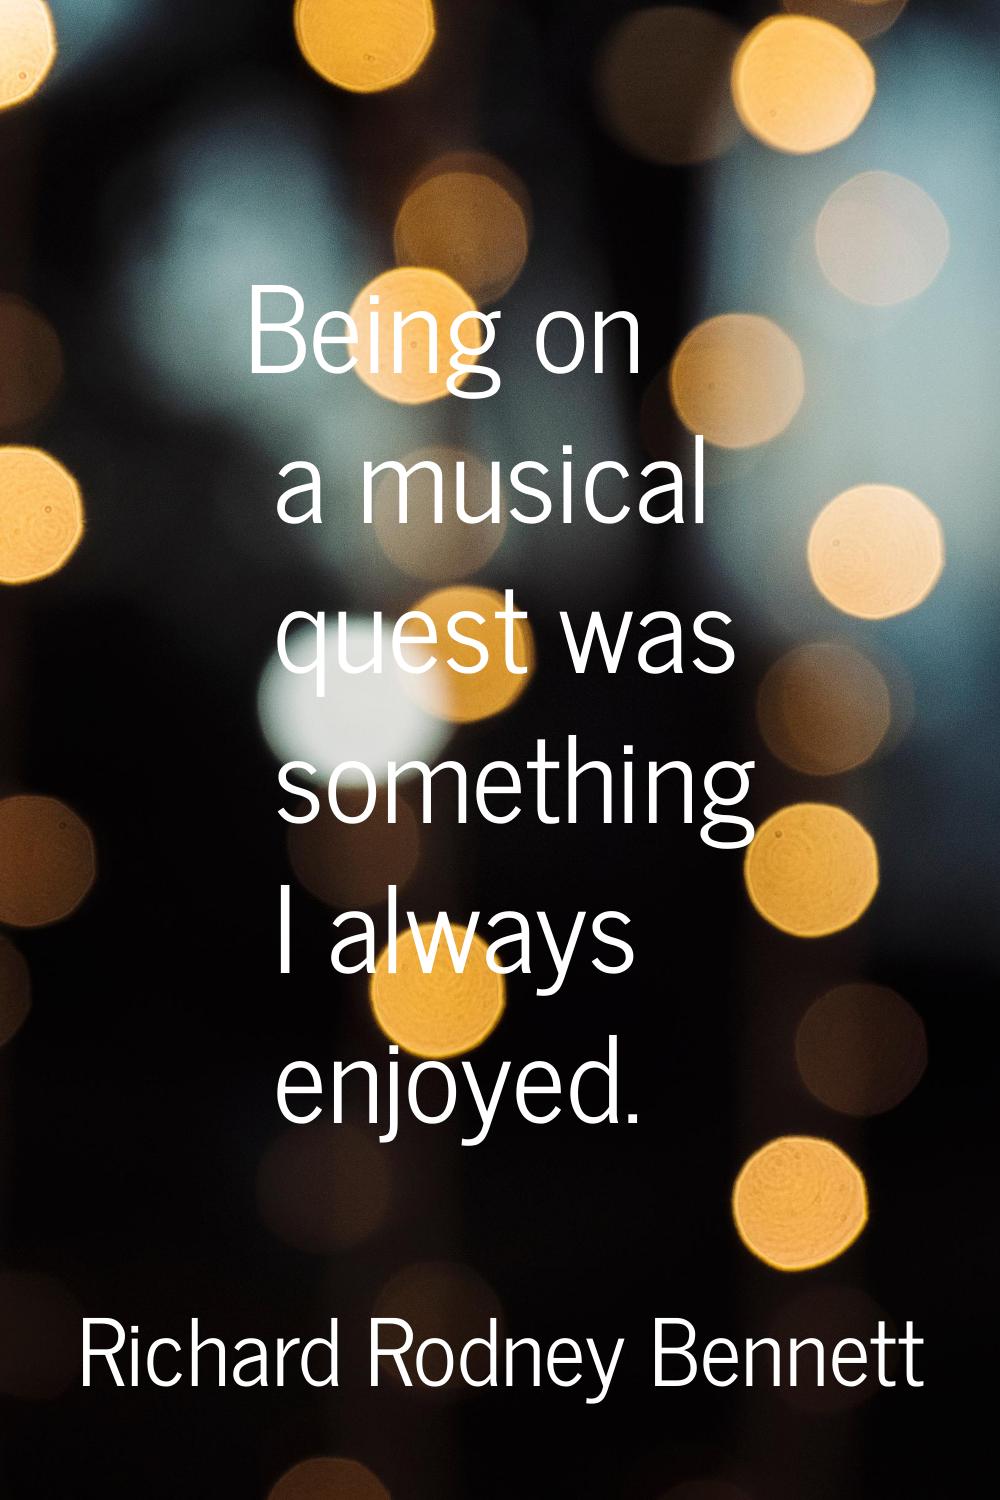 Being on a musical quest was something I always enjoyed.